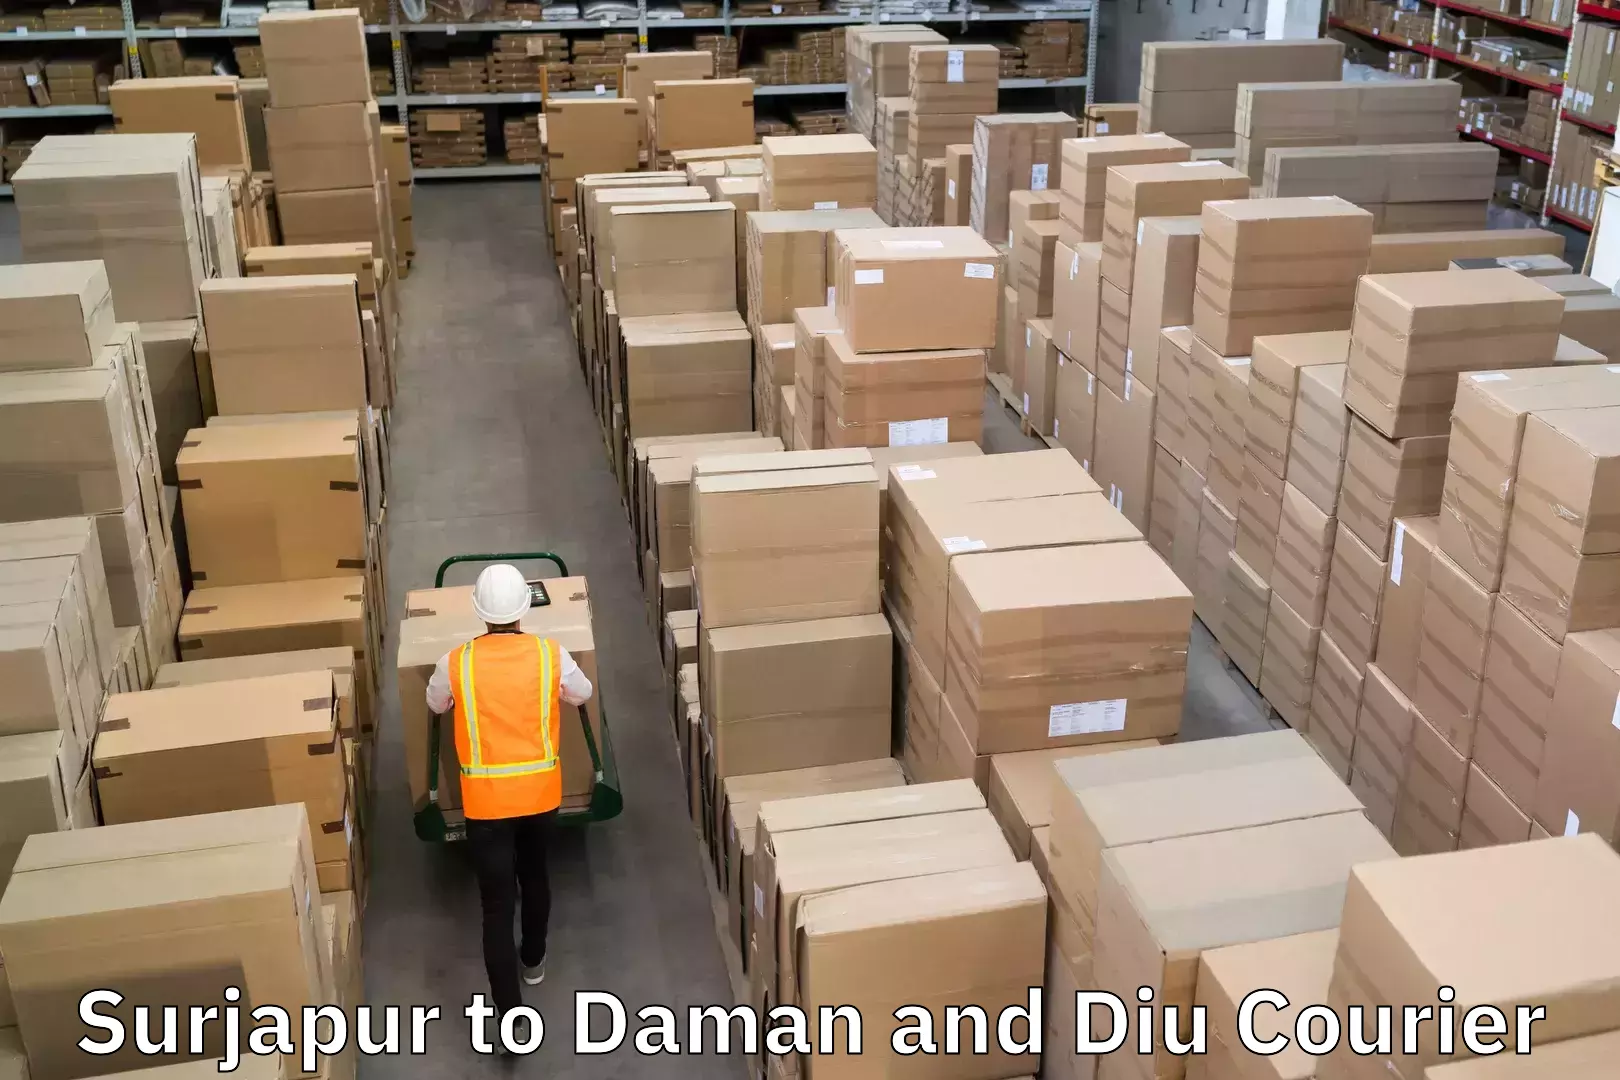 Round-the-clock parcel delivery Surjapur to Daman and Diu